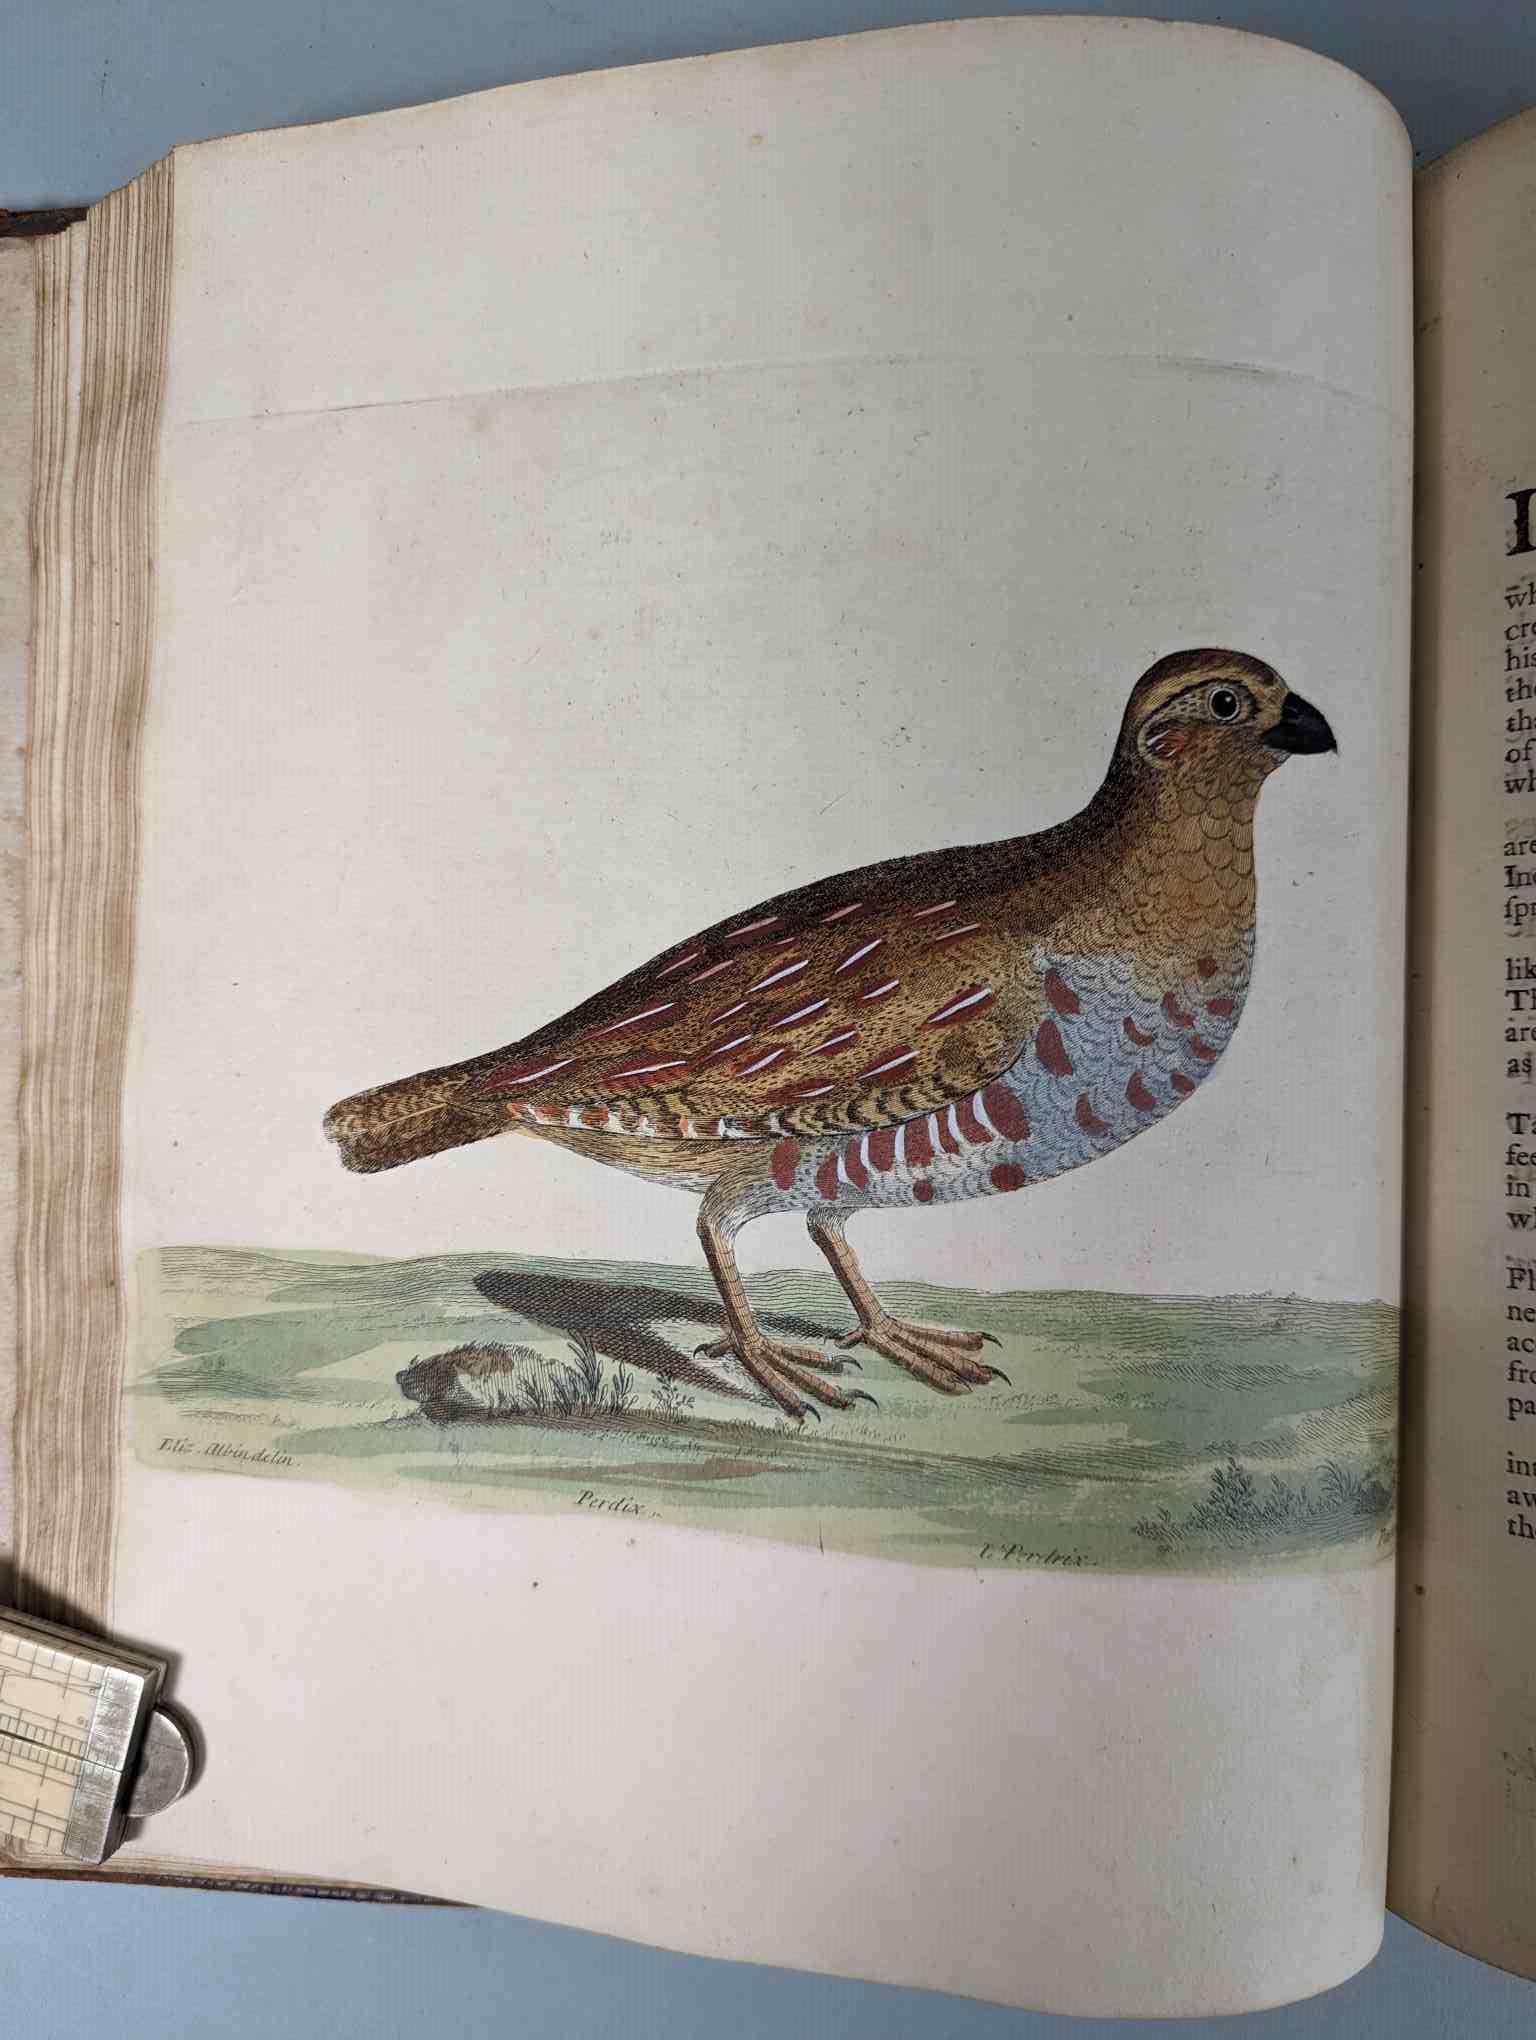 ALBIN, Eleazar. A Natural History of Birds, to which are added, Notes and Observations by W. - Image 30 of 208